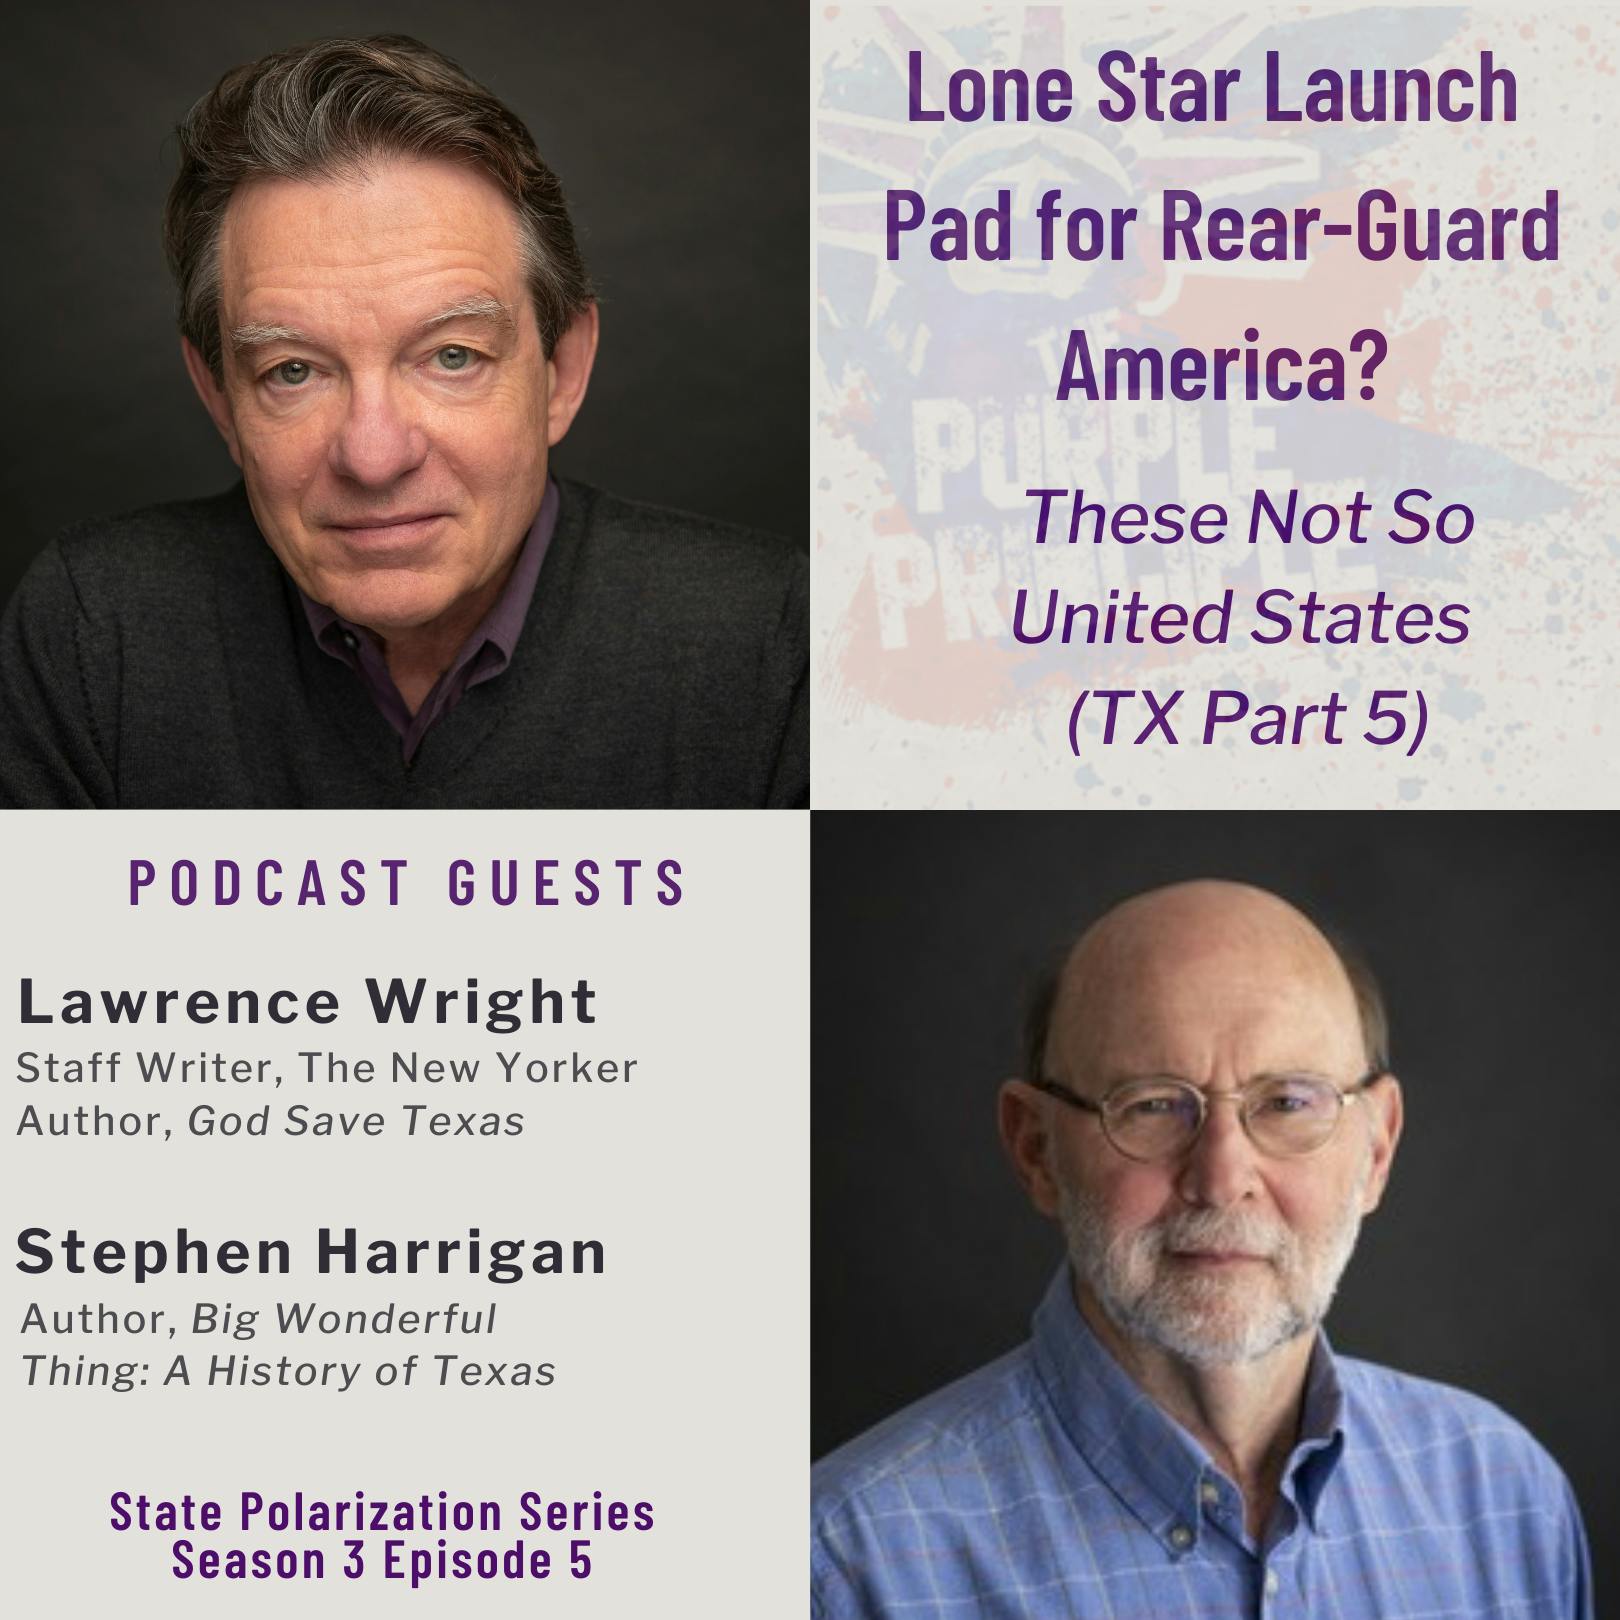 Lone Star Launch Pad for Rear-Guard America? These Not So United States (TX Part 5)